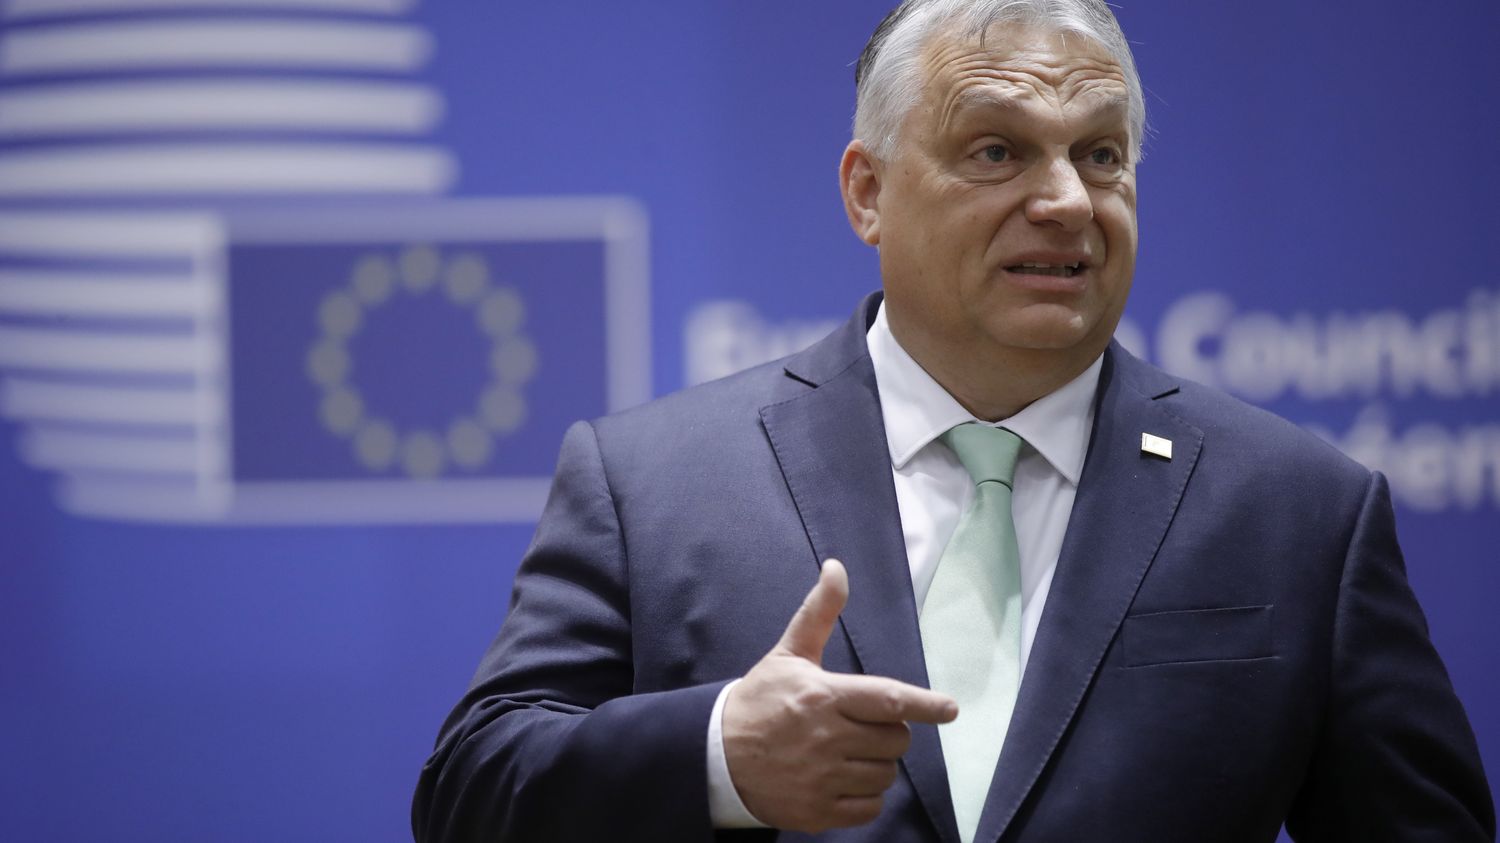 European Union: why the European Parliament wants to prevent Hungary from taking over the Presidency of the Council of the EU
